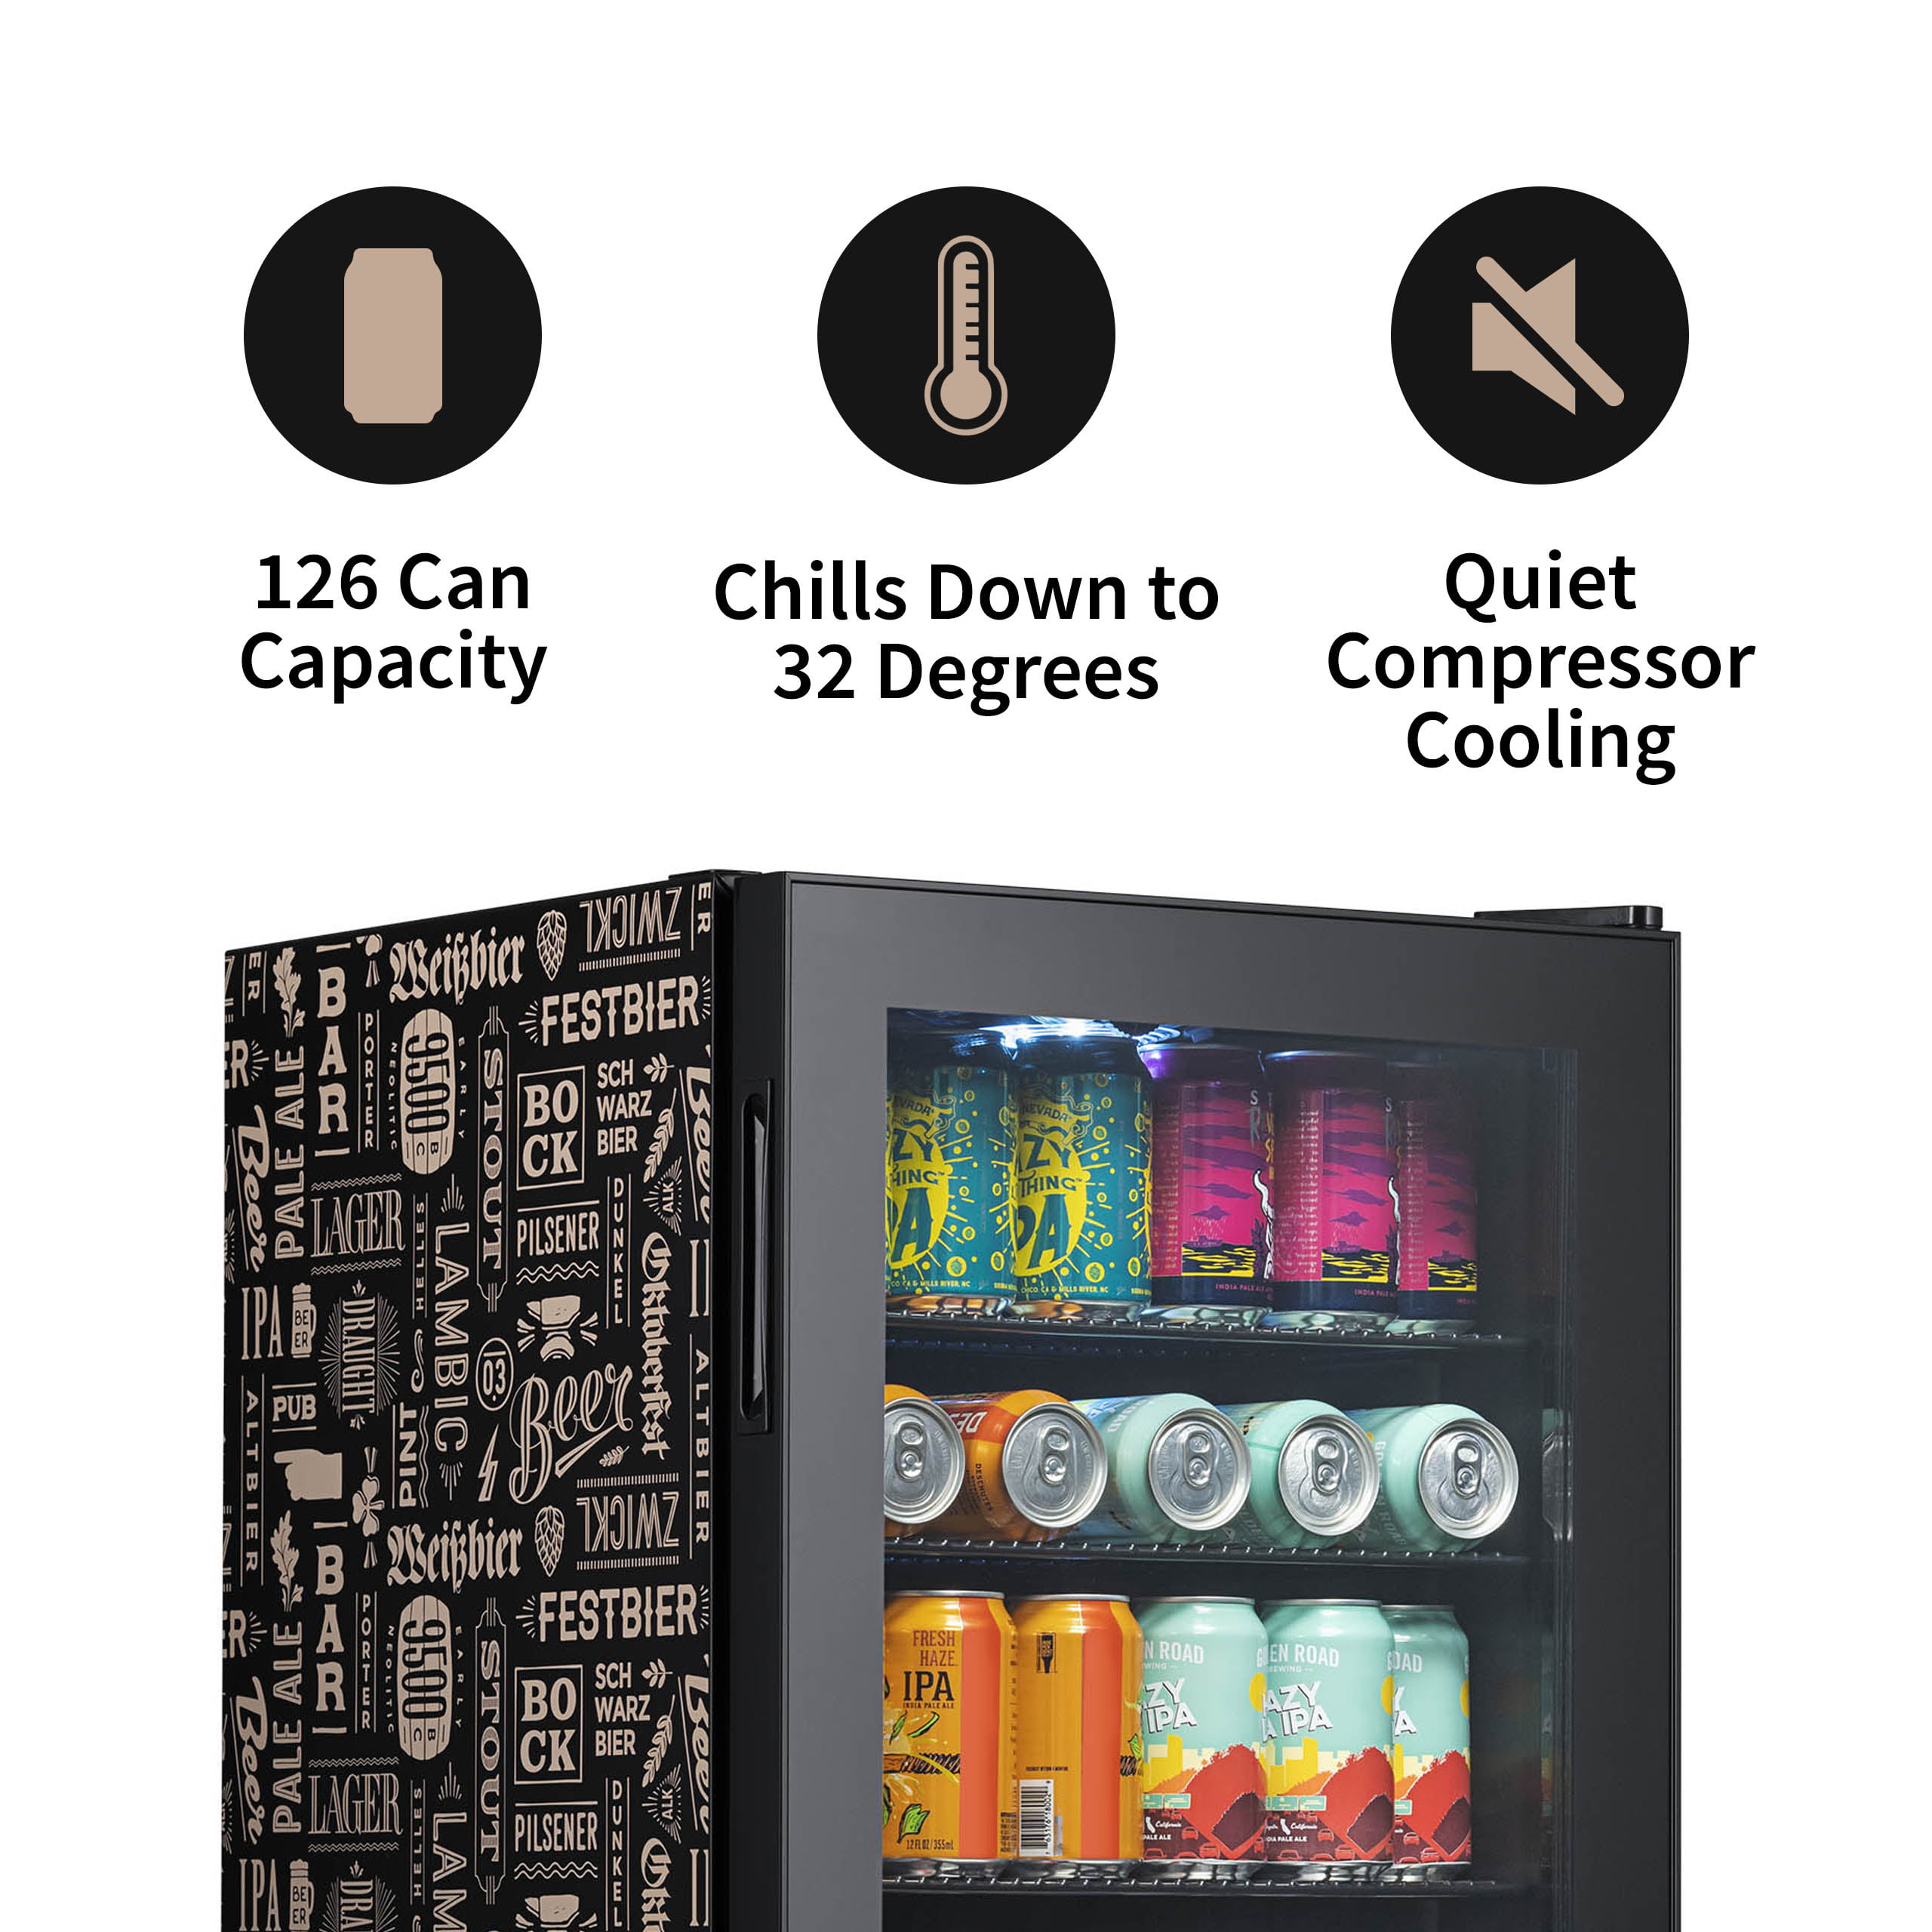 Newair Beverage Refrigerator Cooler |126 Cans Free Standing with Glass Door